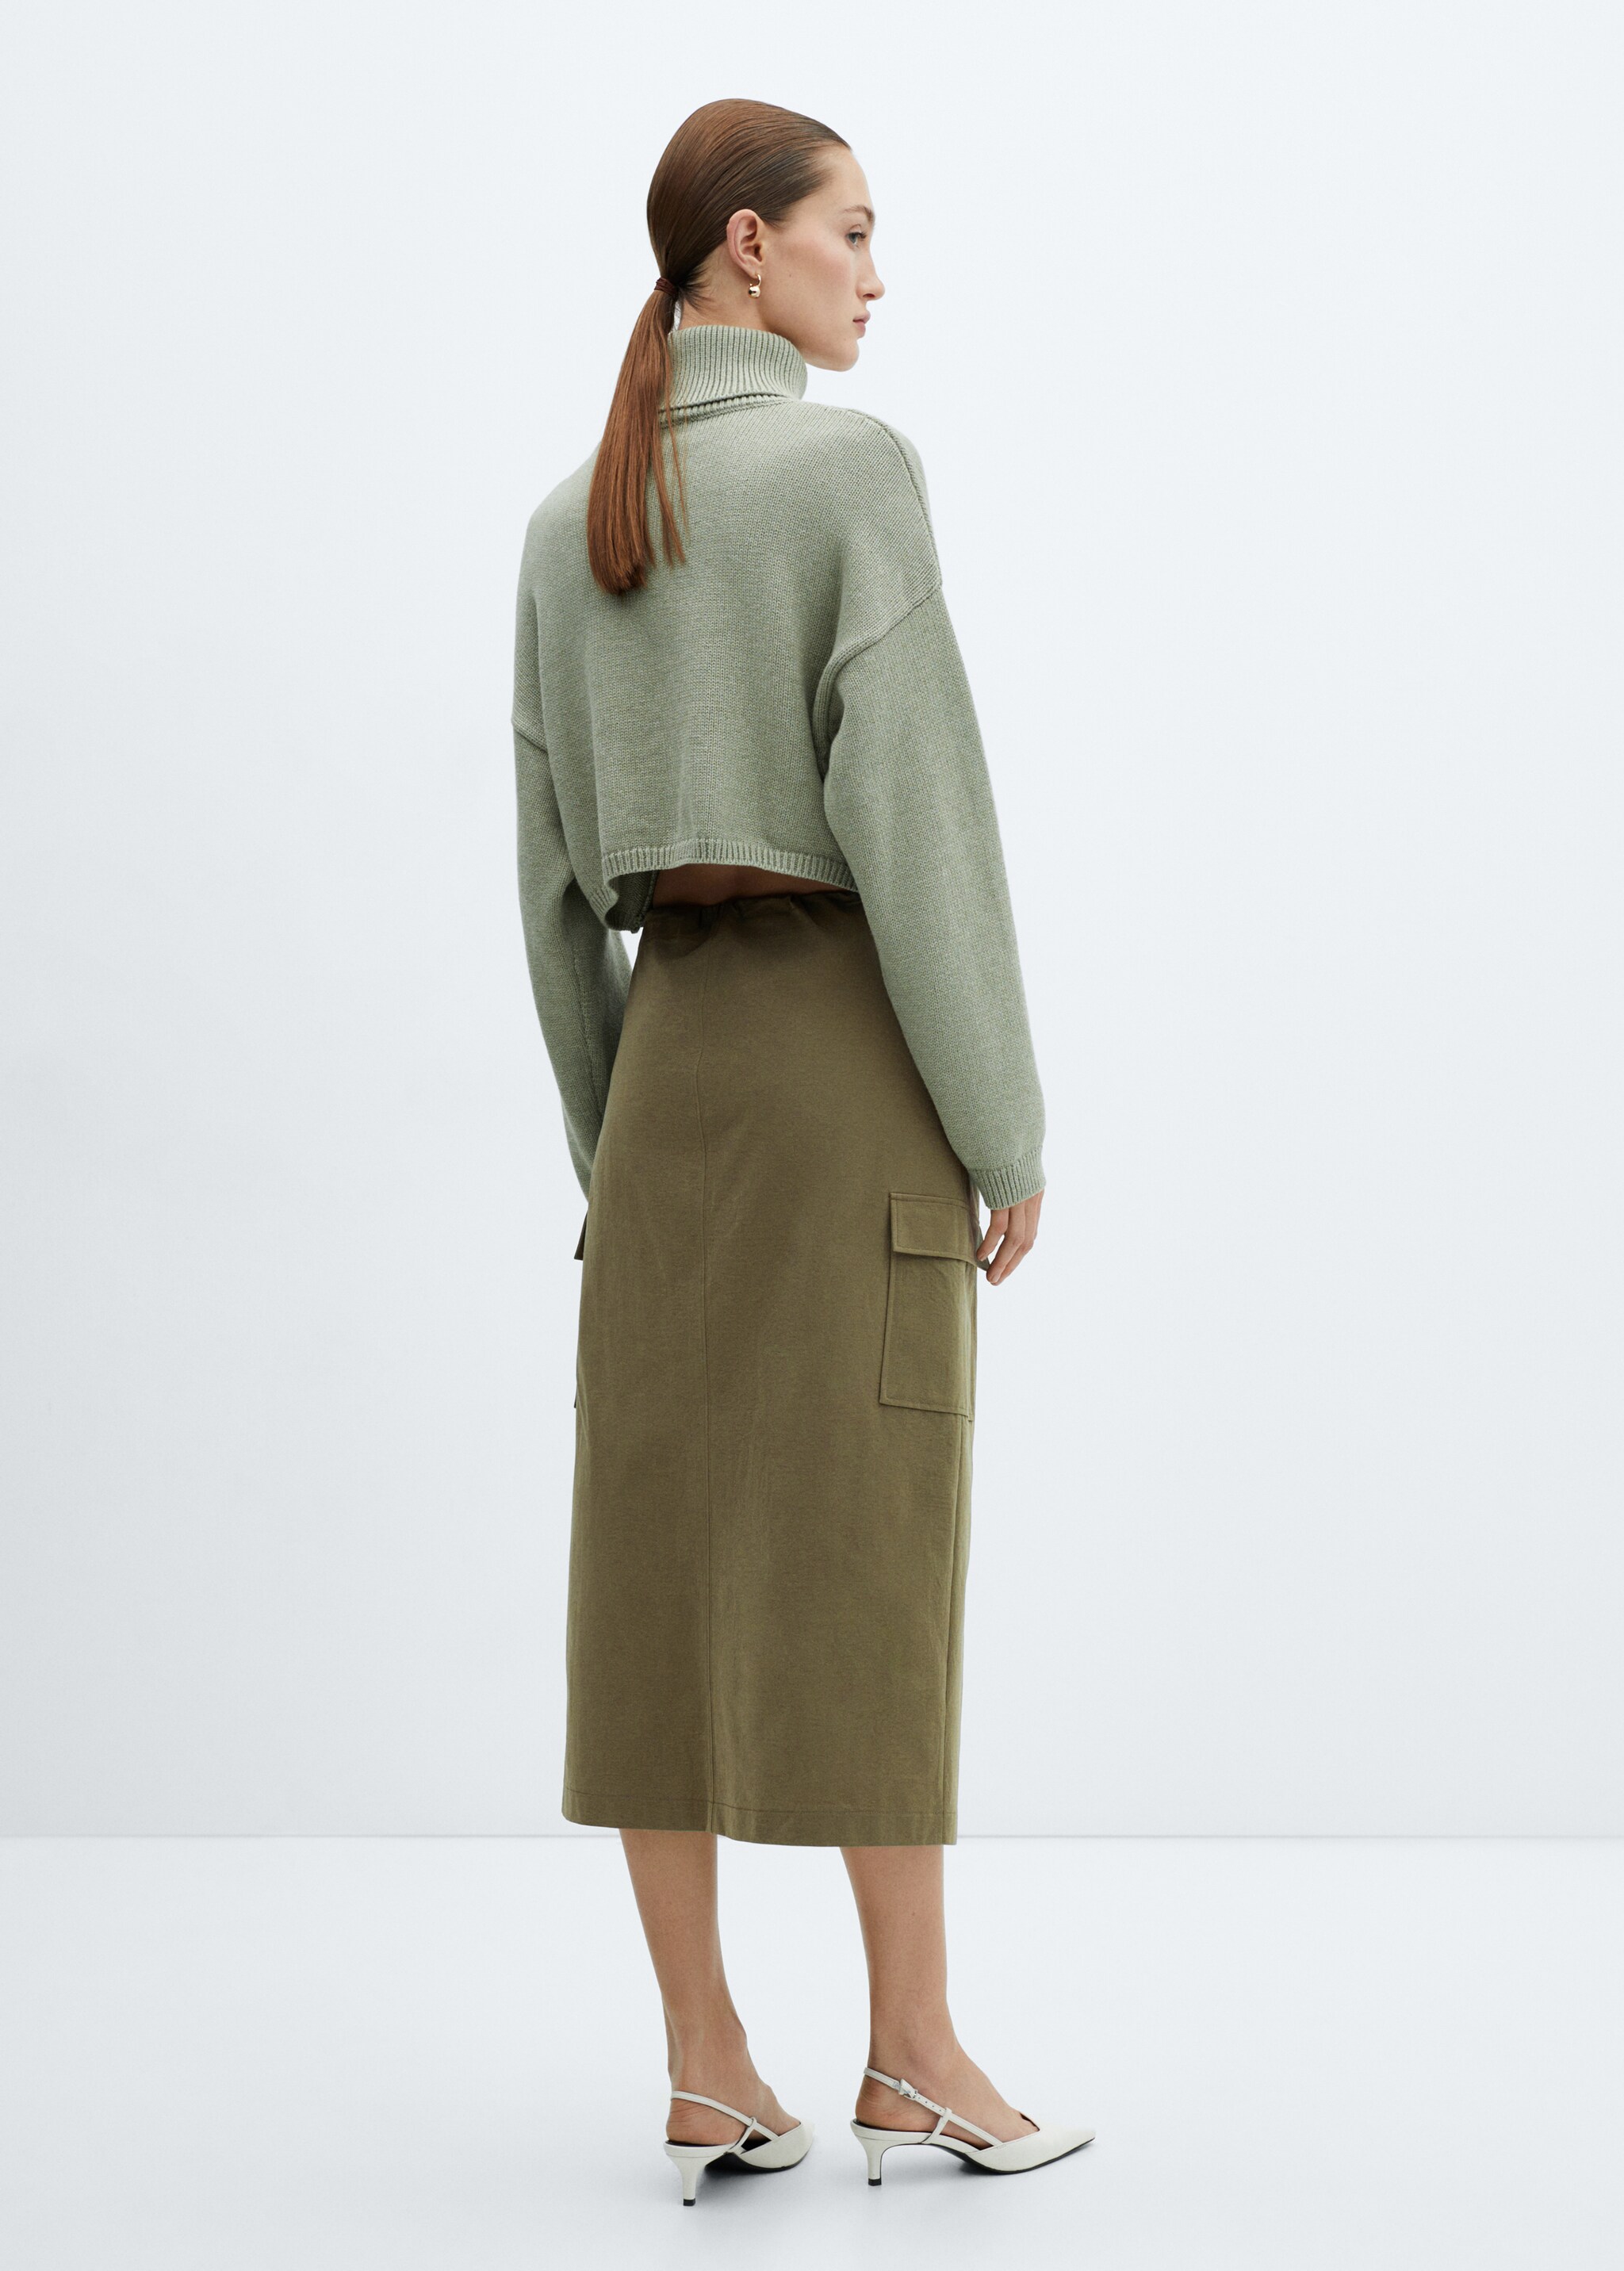 Midi skirt cargo pockets - Reverse of the article